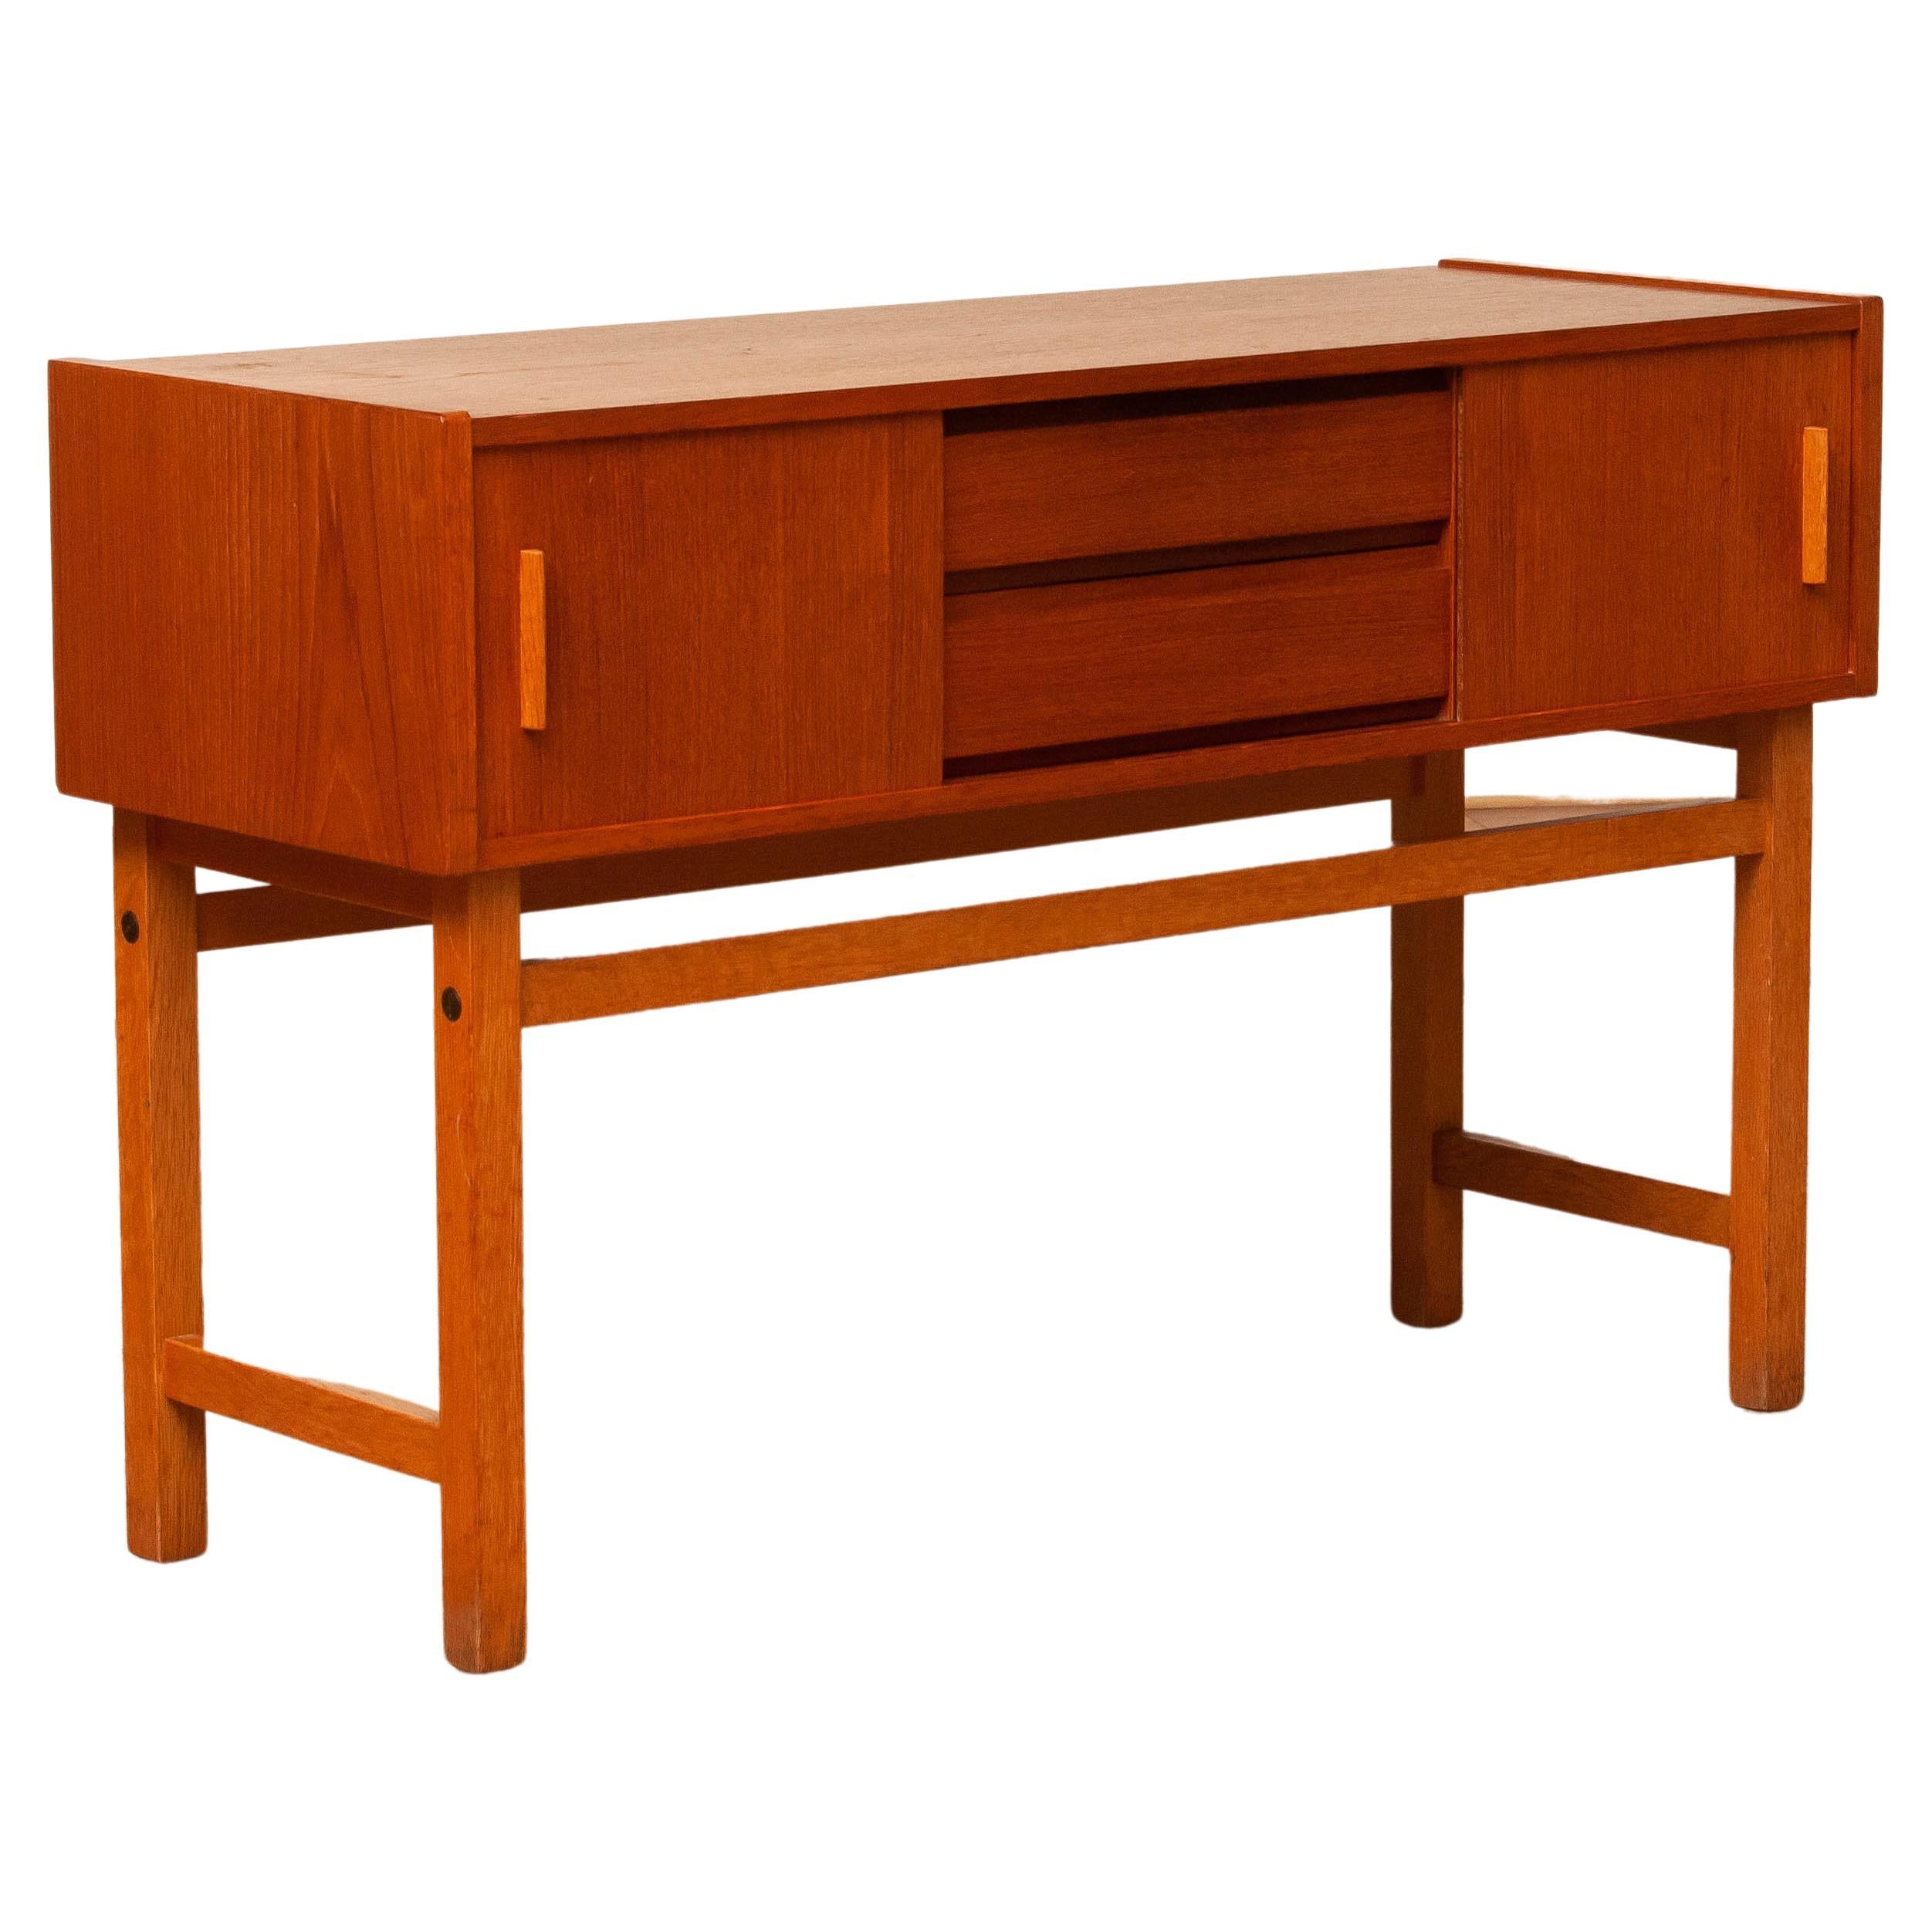 1960s Teak Cabinet / Credenzas / Console With Drawers And Sliding Doors. Sweden. For Sale